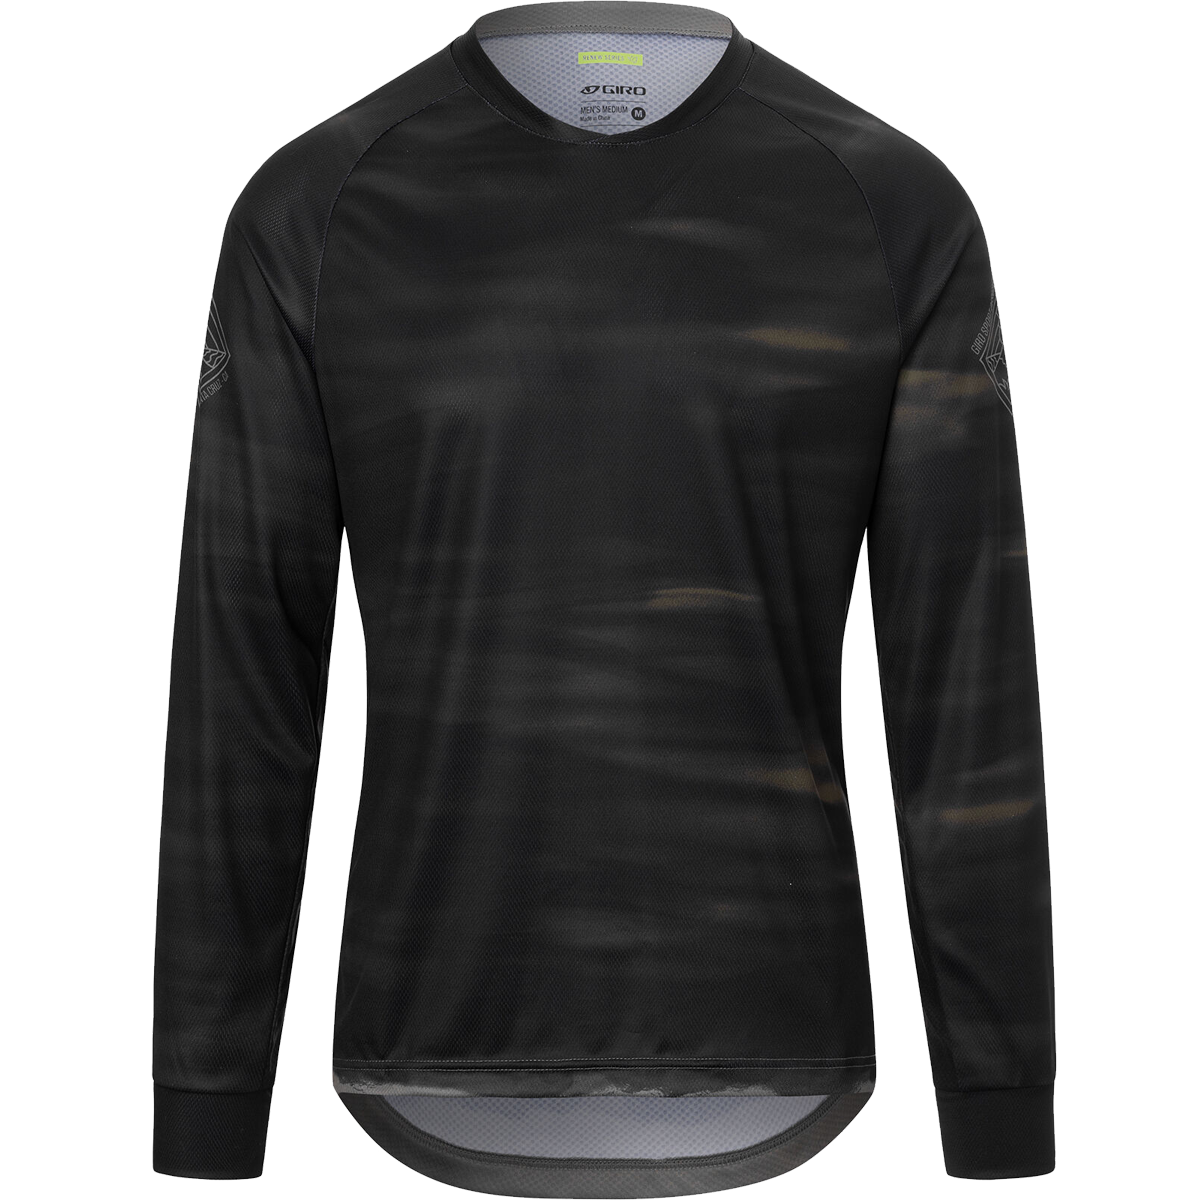 Roust Long Sleeve Jersey alternate view